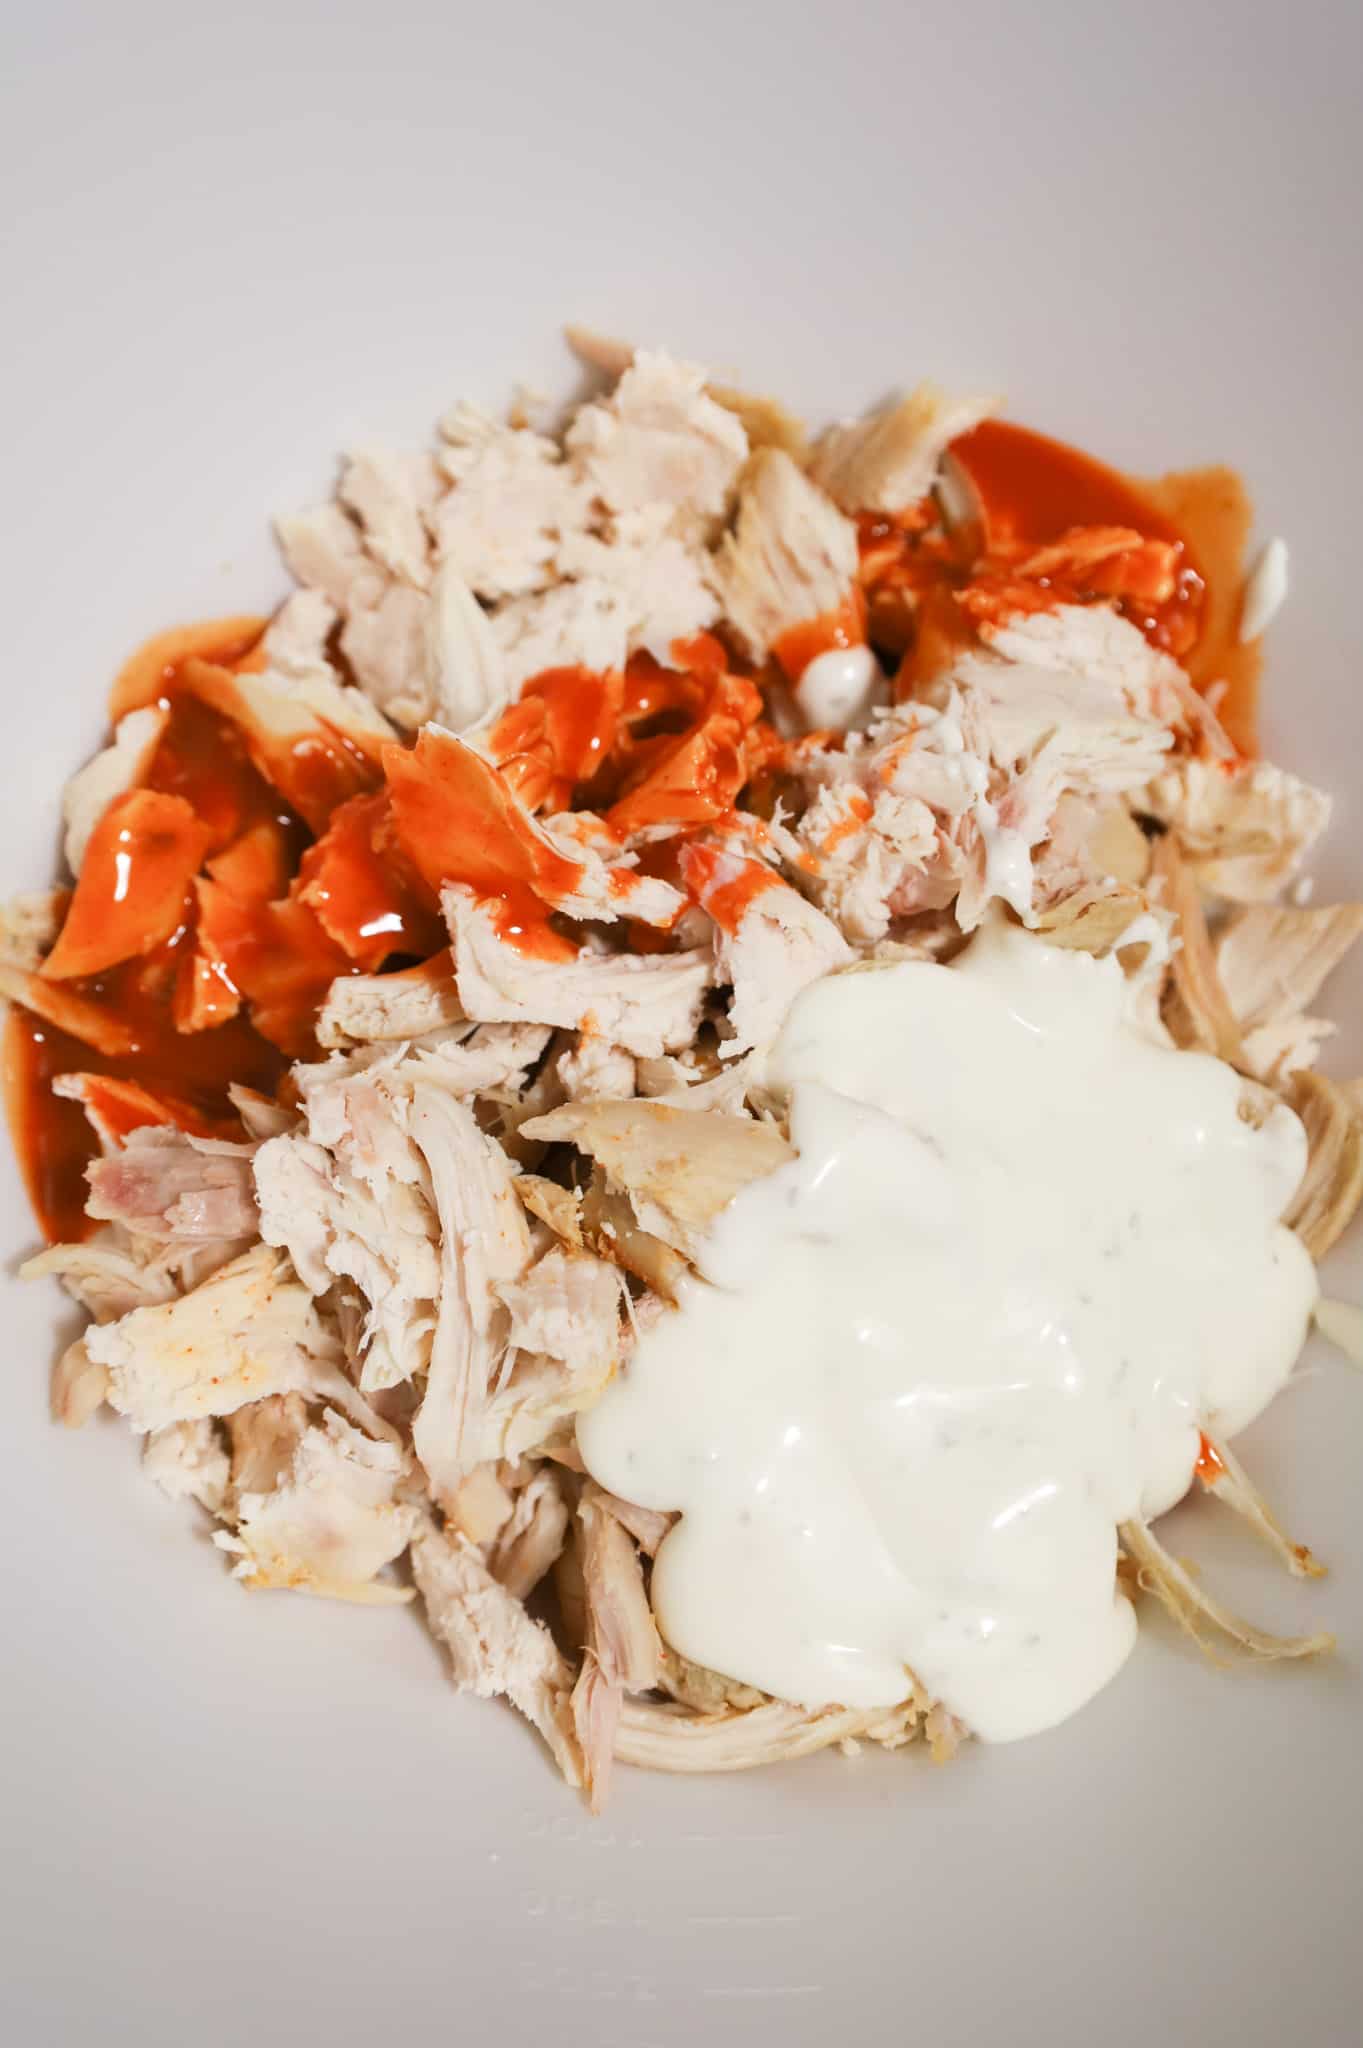 Buffalo sauce and ranch dressing on top of shredded chicken in a mixing bowl